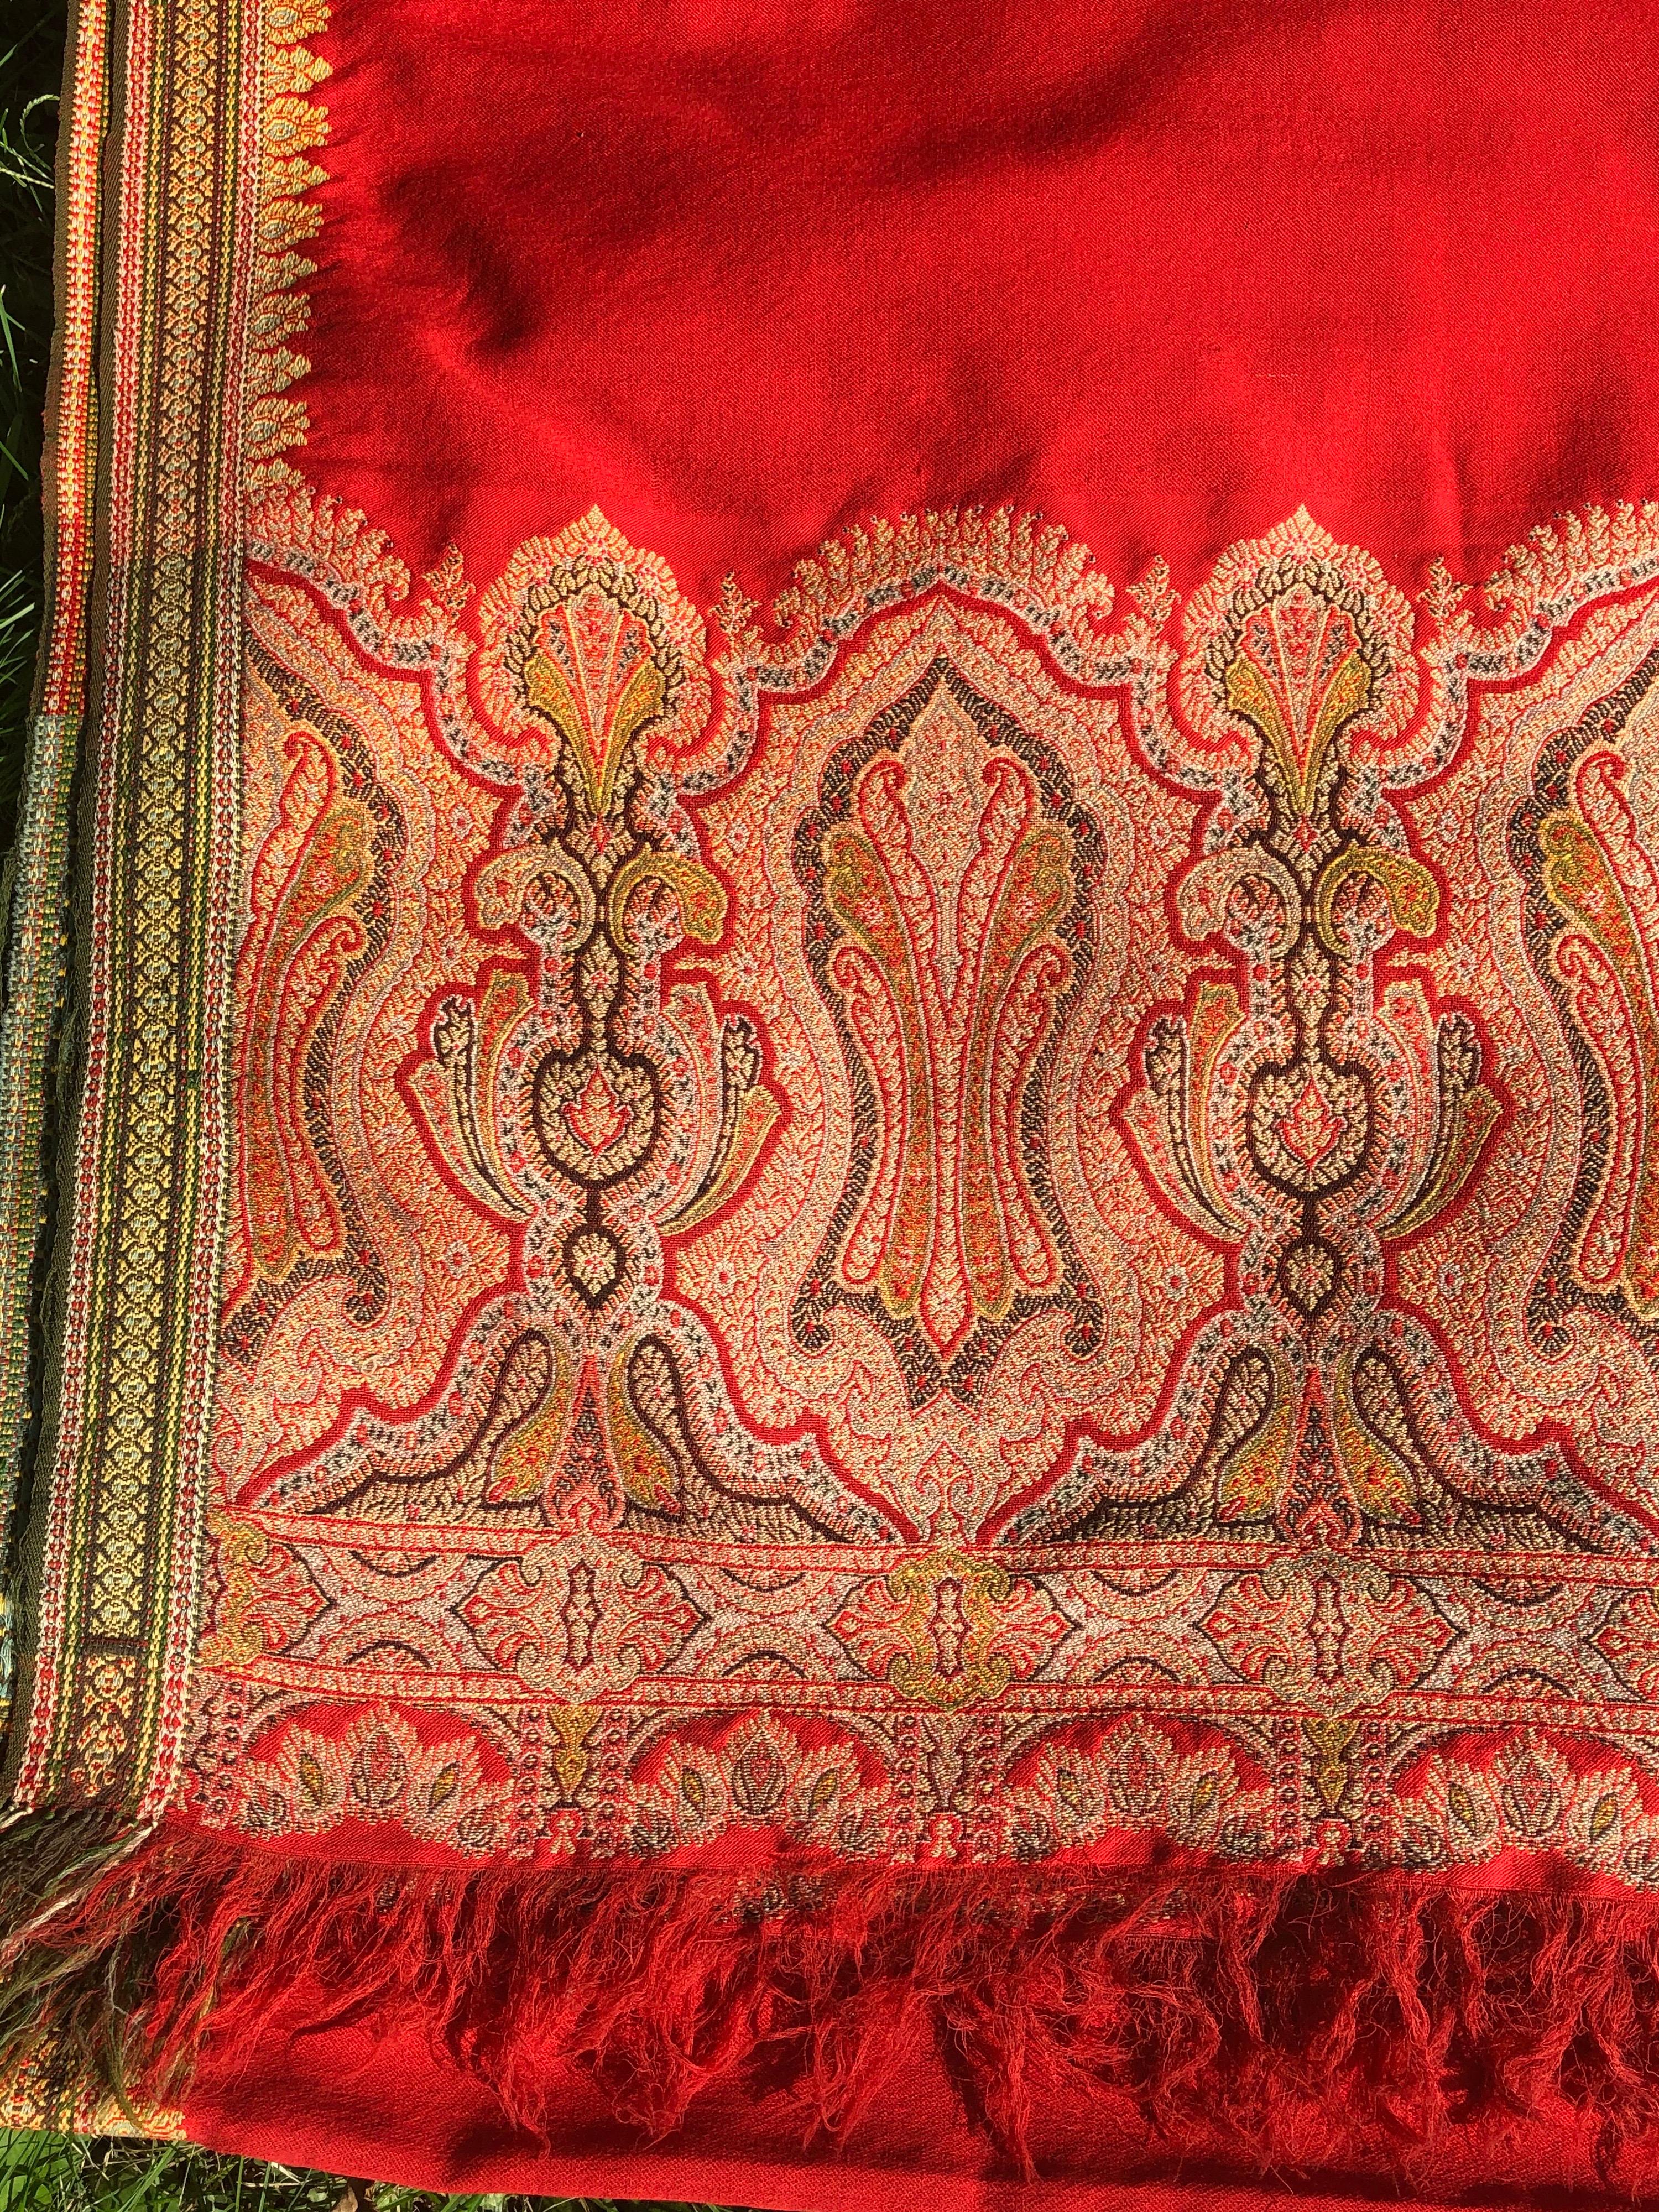 Brilliant tomato red finely woven wool Kashmiri throw or shawl
with beautiful paisley borders. Predominantly red wool with red, yellow and
green embroidered borders at the base and along the sides. Very large
size throw. Few very small holes and